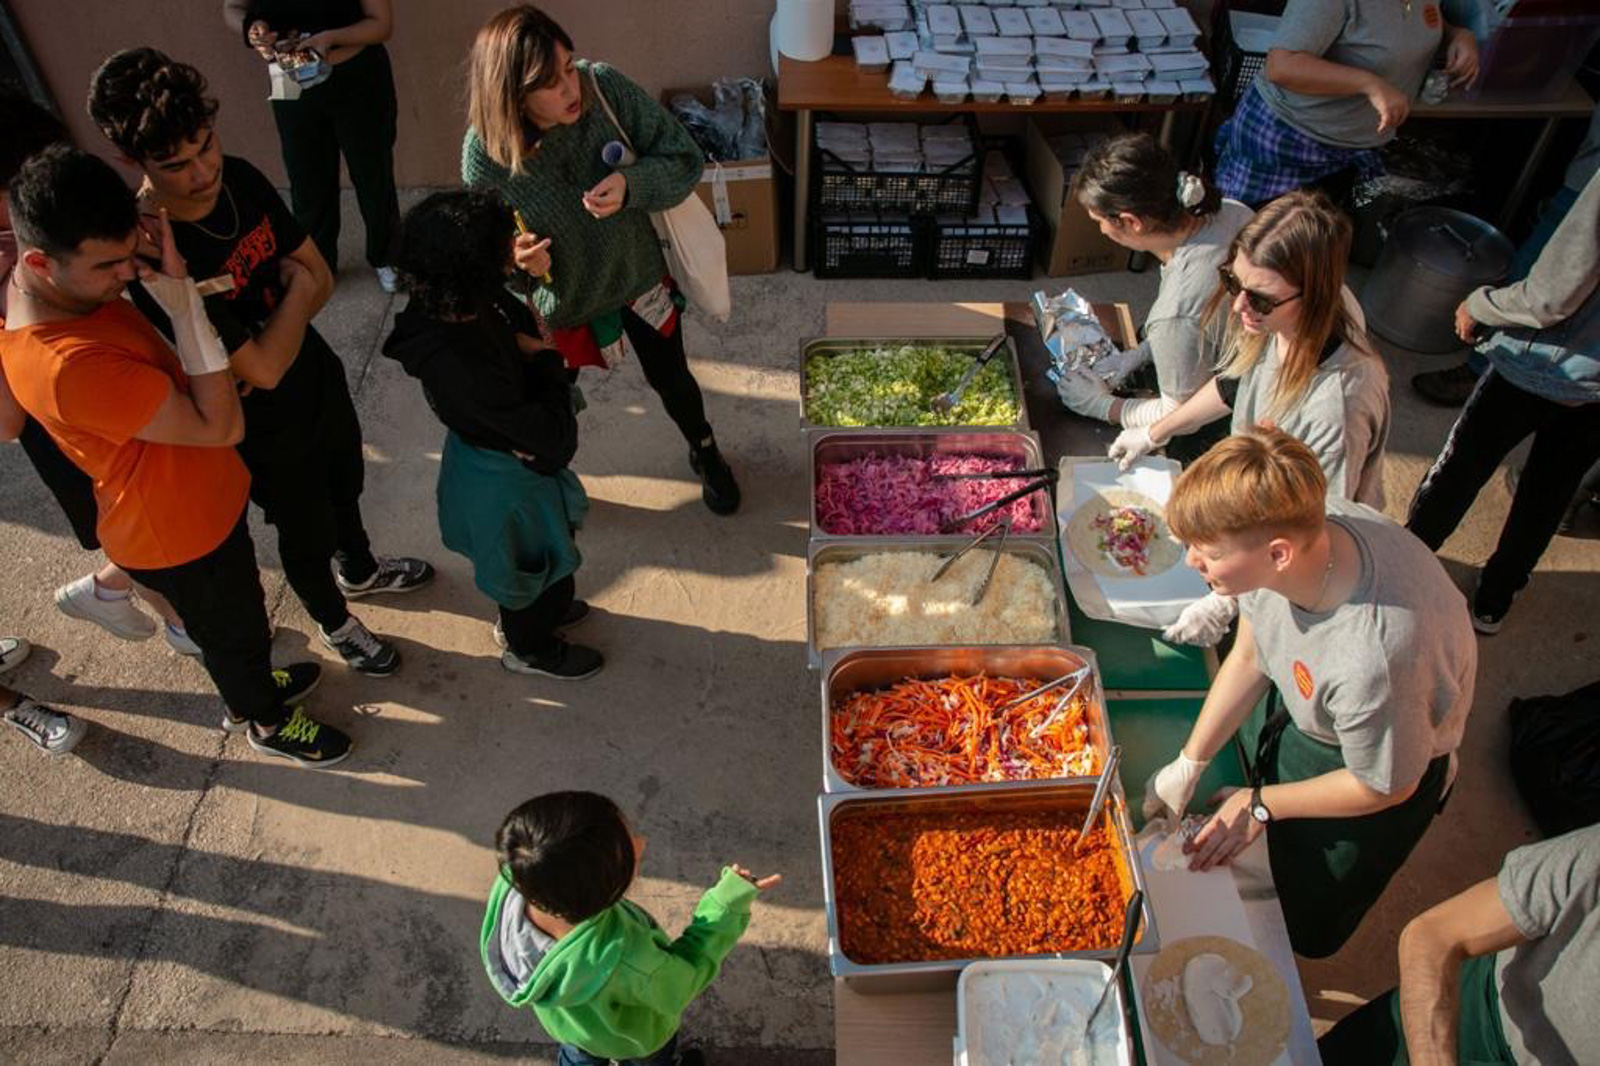 Workers serve food at the Saffron Kitchen Project in Athens